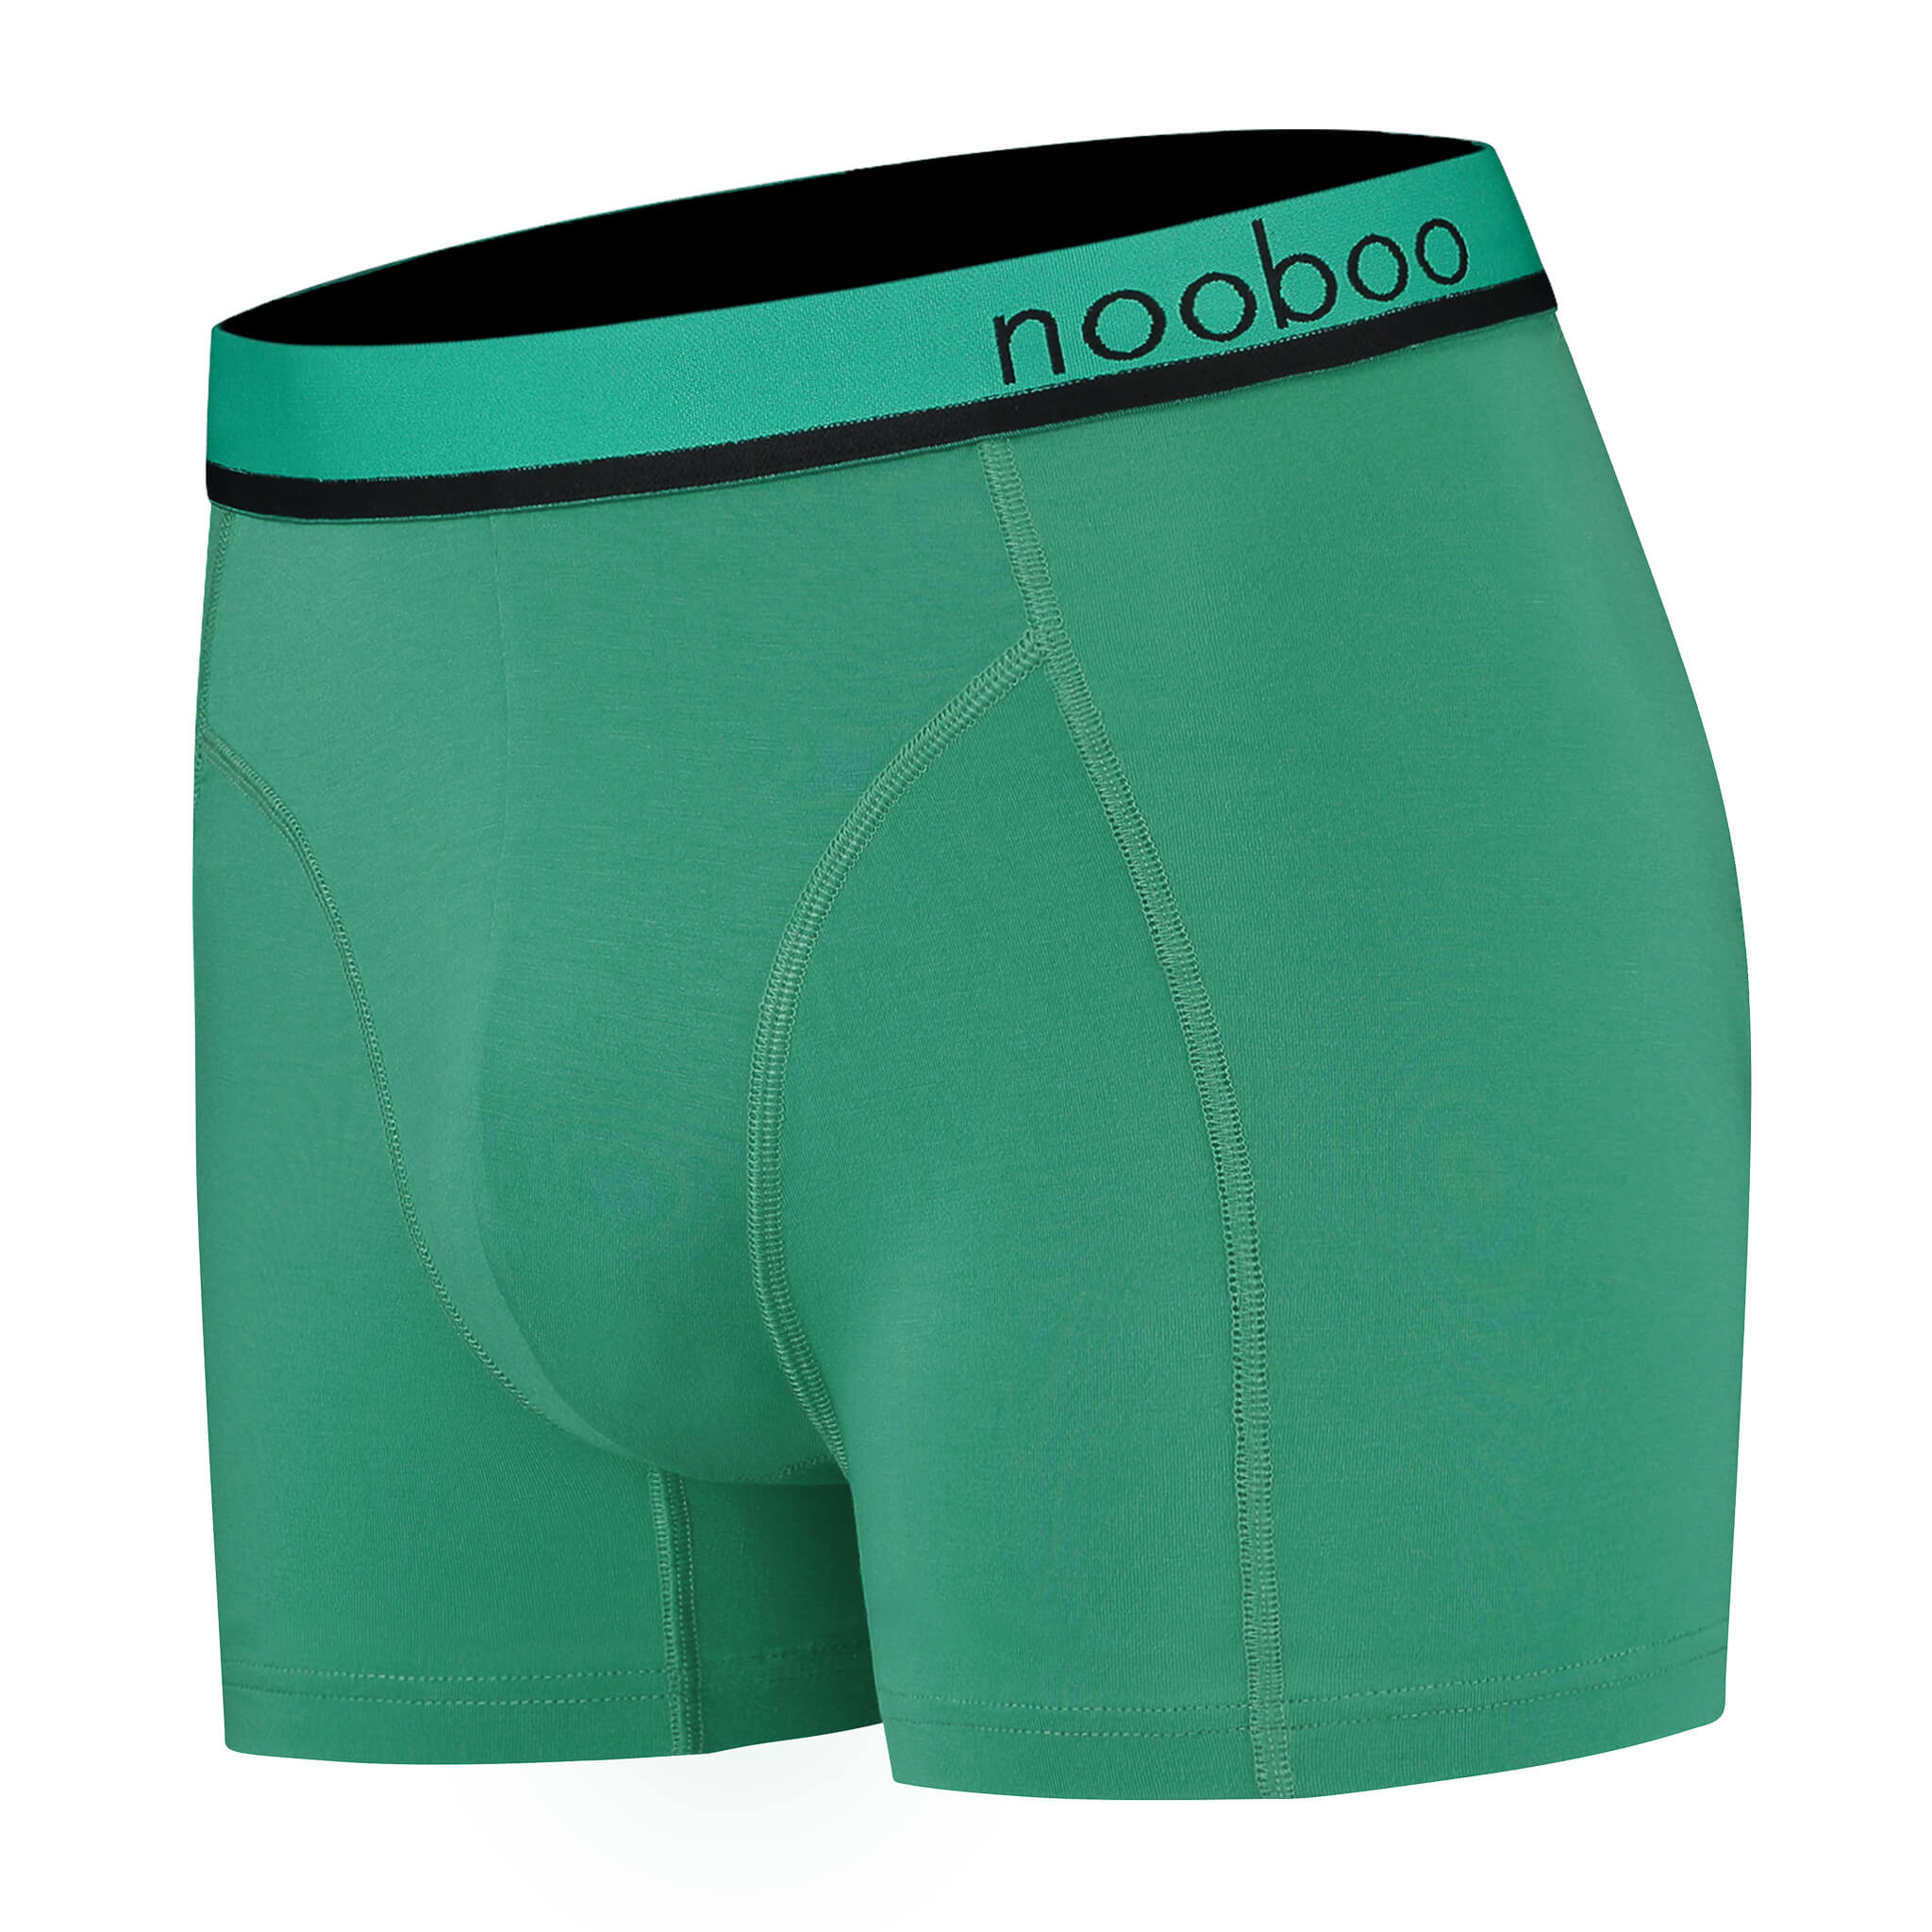 Project Cece  3-PACK NOOBOO LUXE BAMBOO BOXERSHORTS (2+1 FREE)